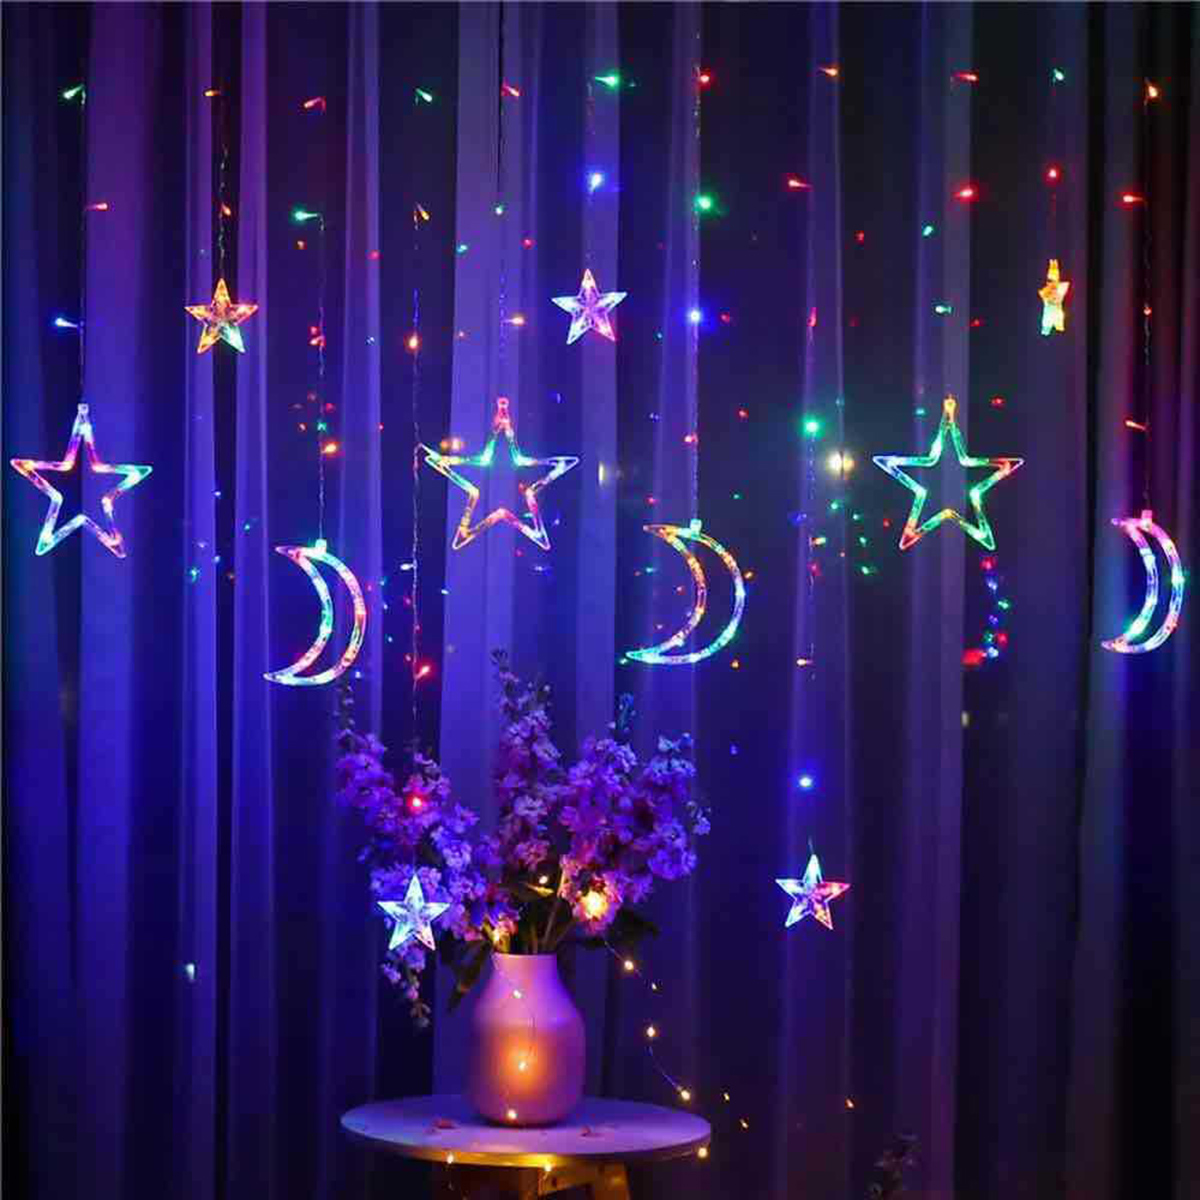 Moon and Star LED String Light